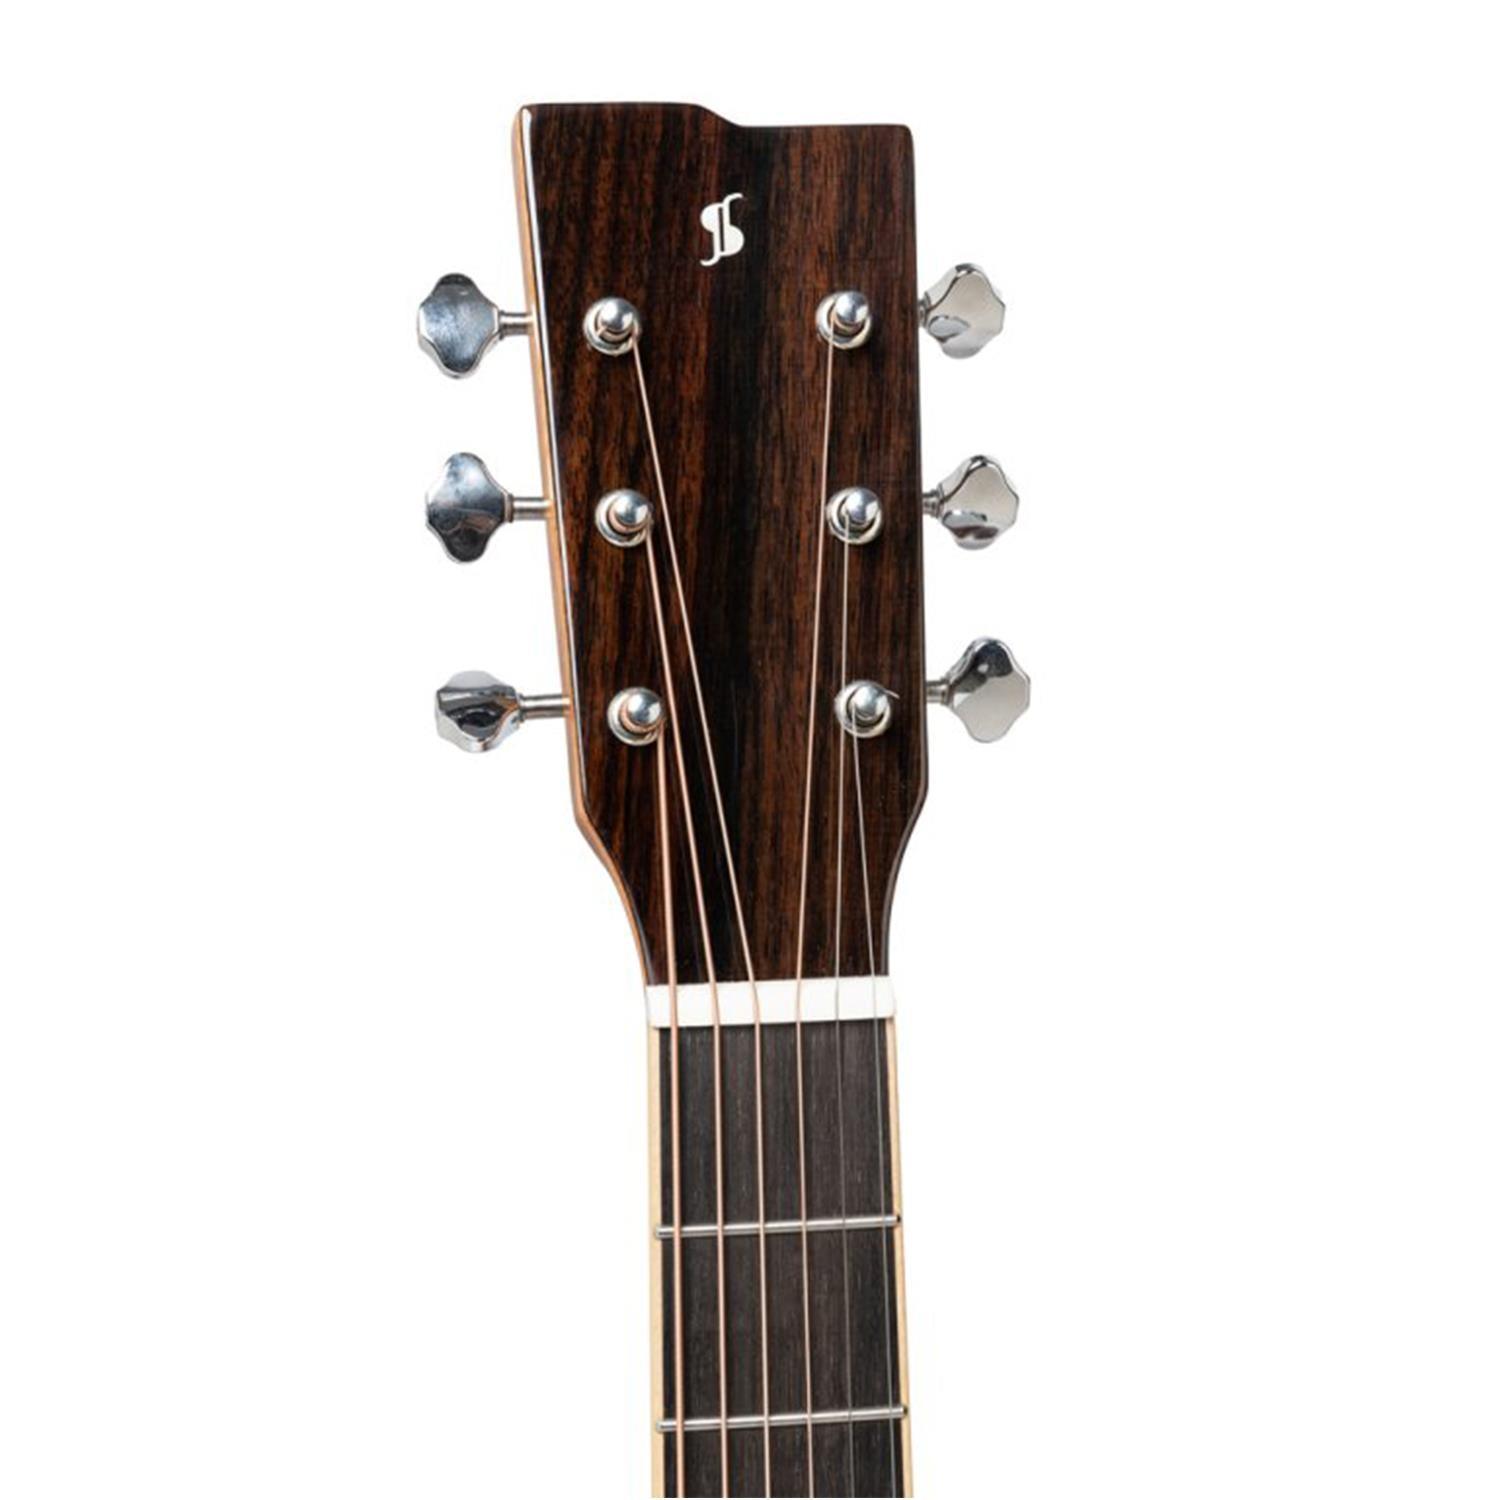 Stagg SA45 O-AC Series 45 Natural Orchestral Acoustic Guitar with Spruce Top - DY Pro Audio